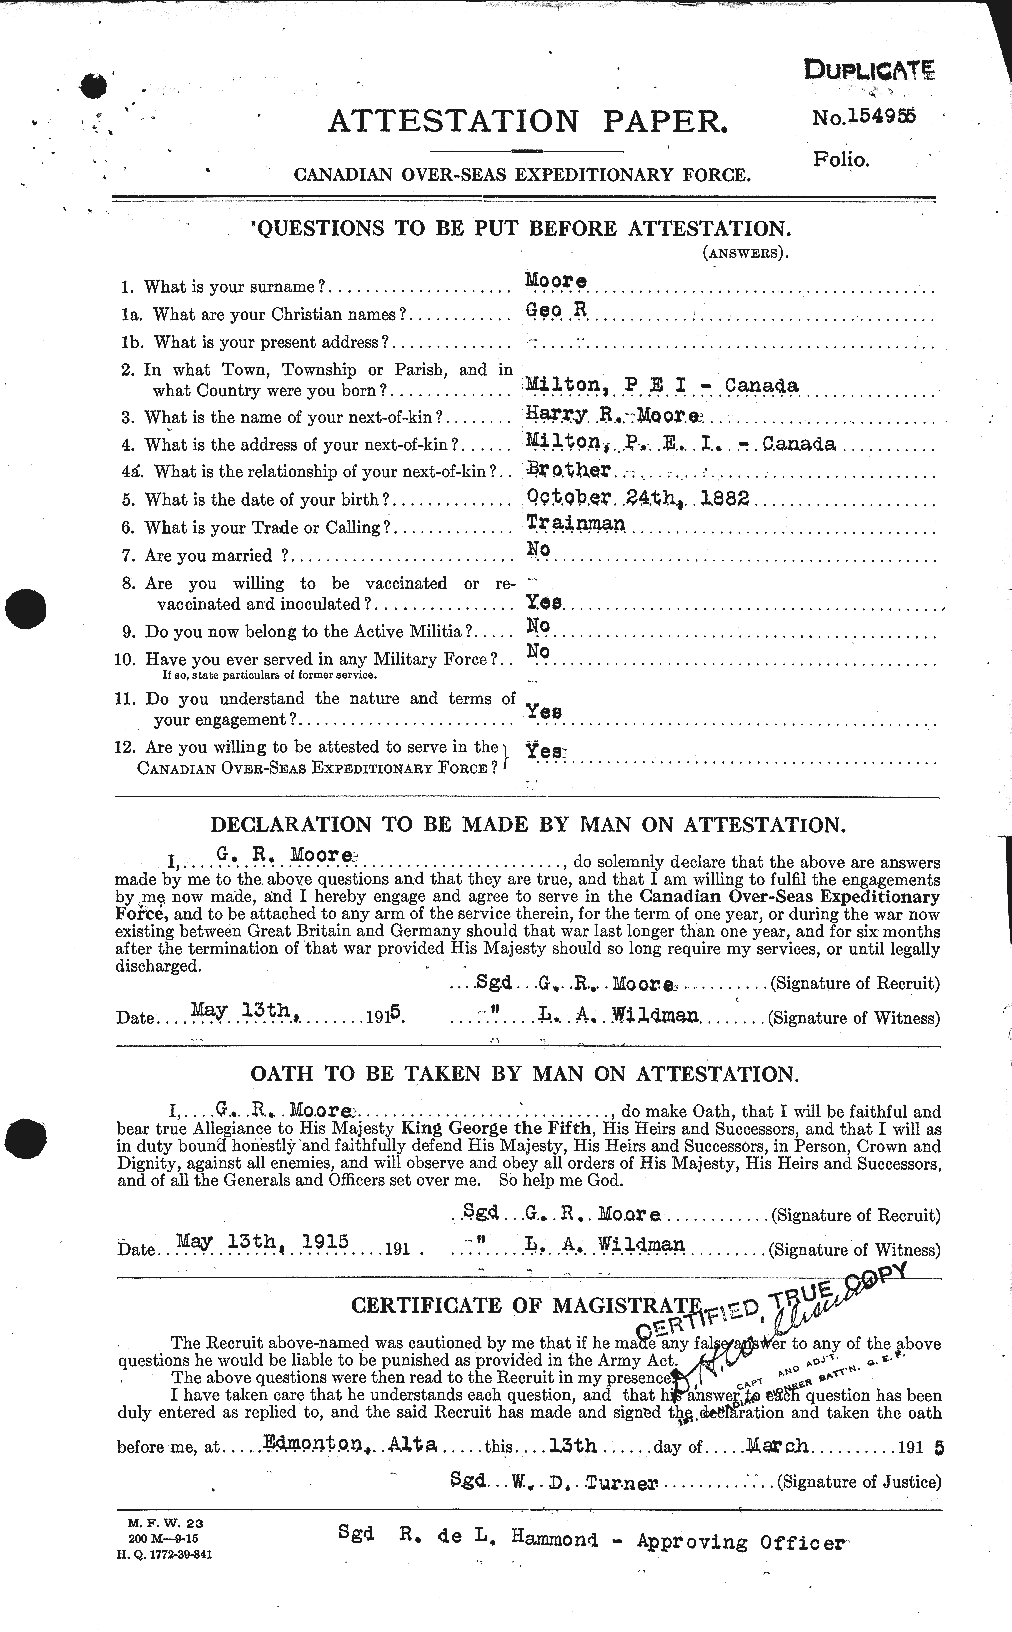 Personnel Records of the First World War - CEF 502020a